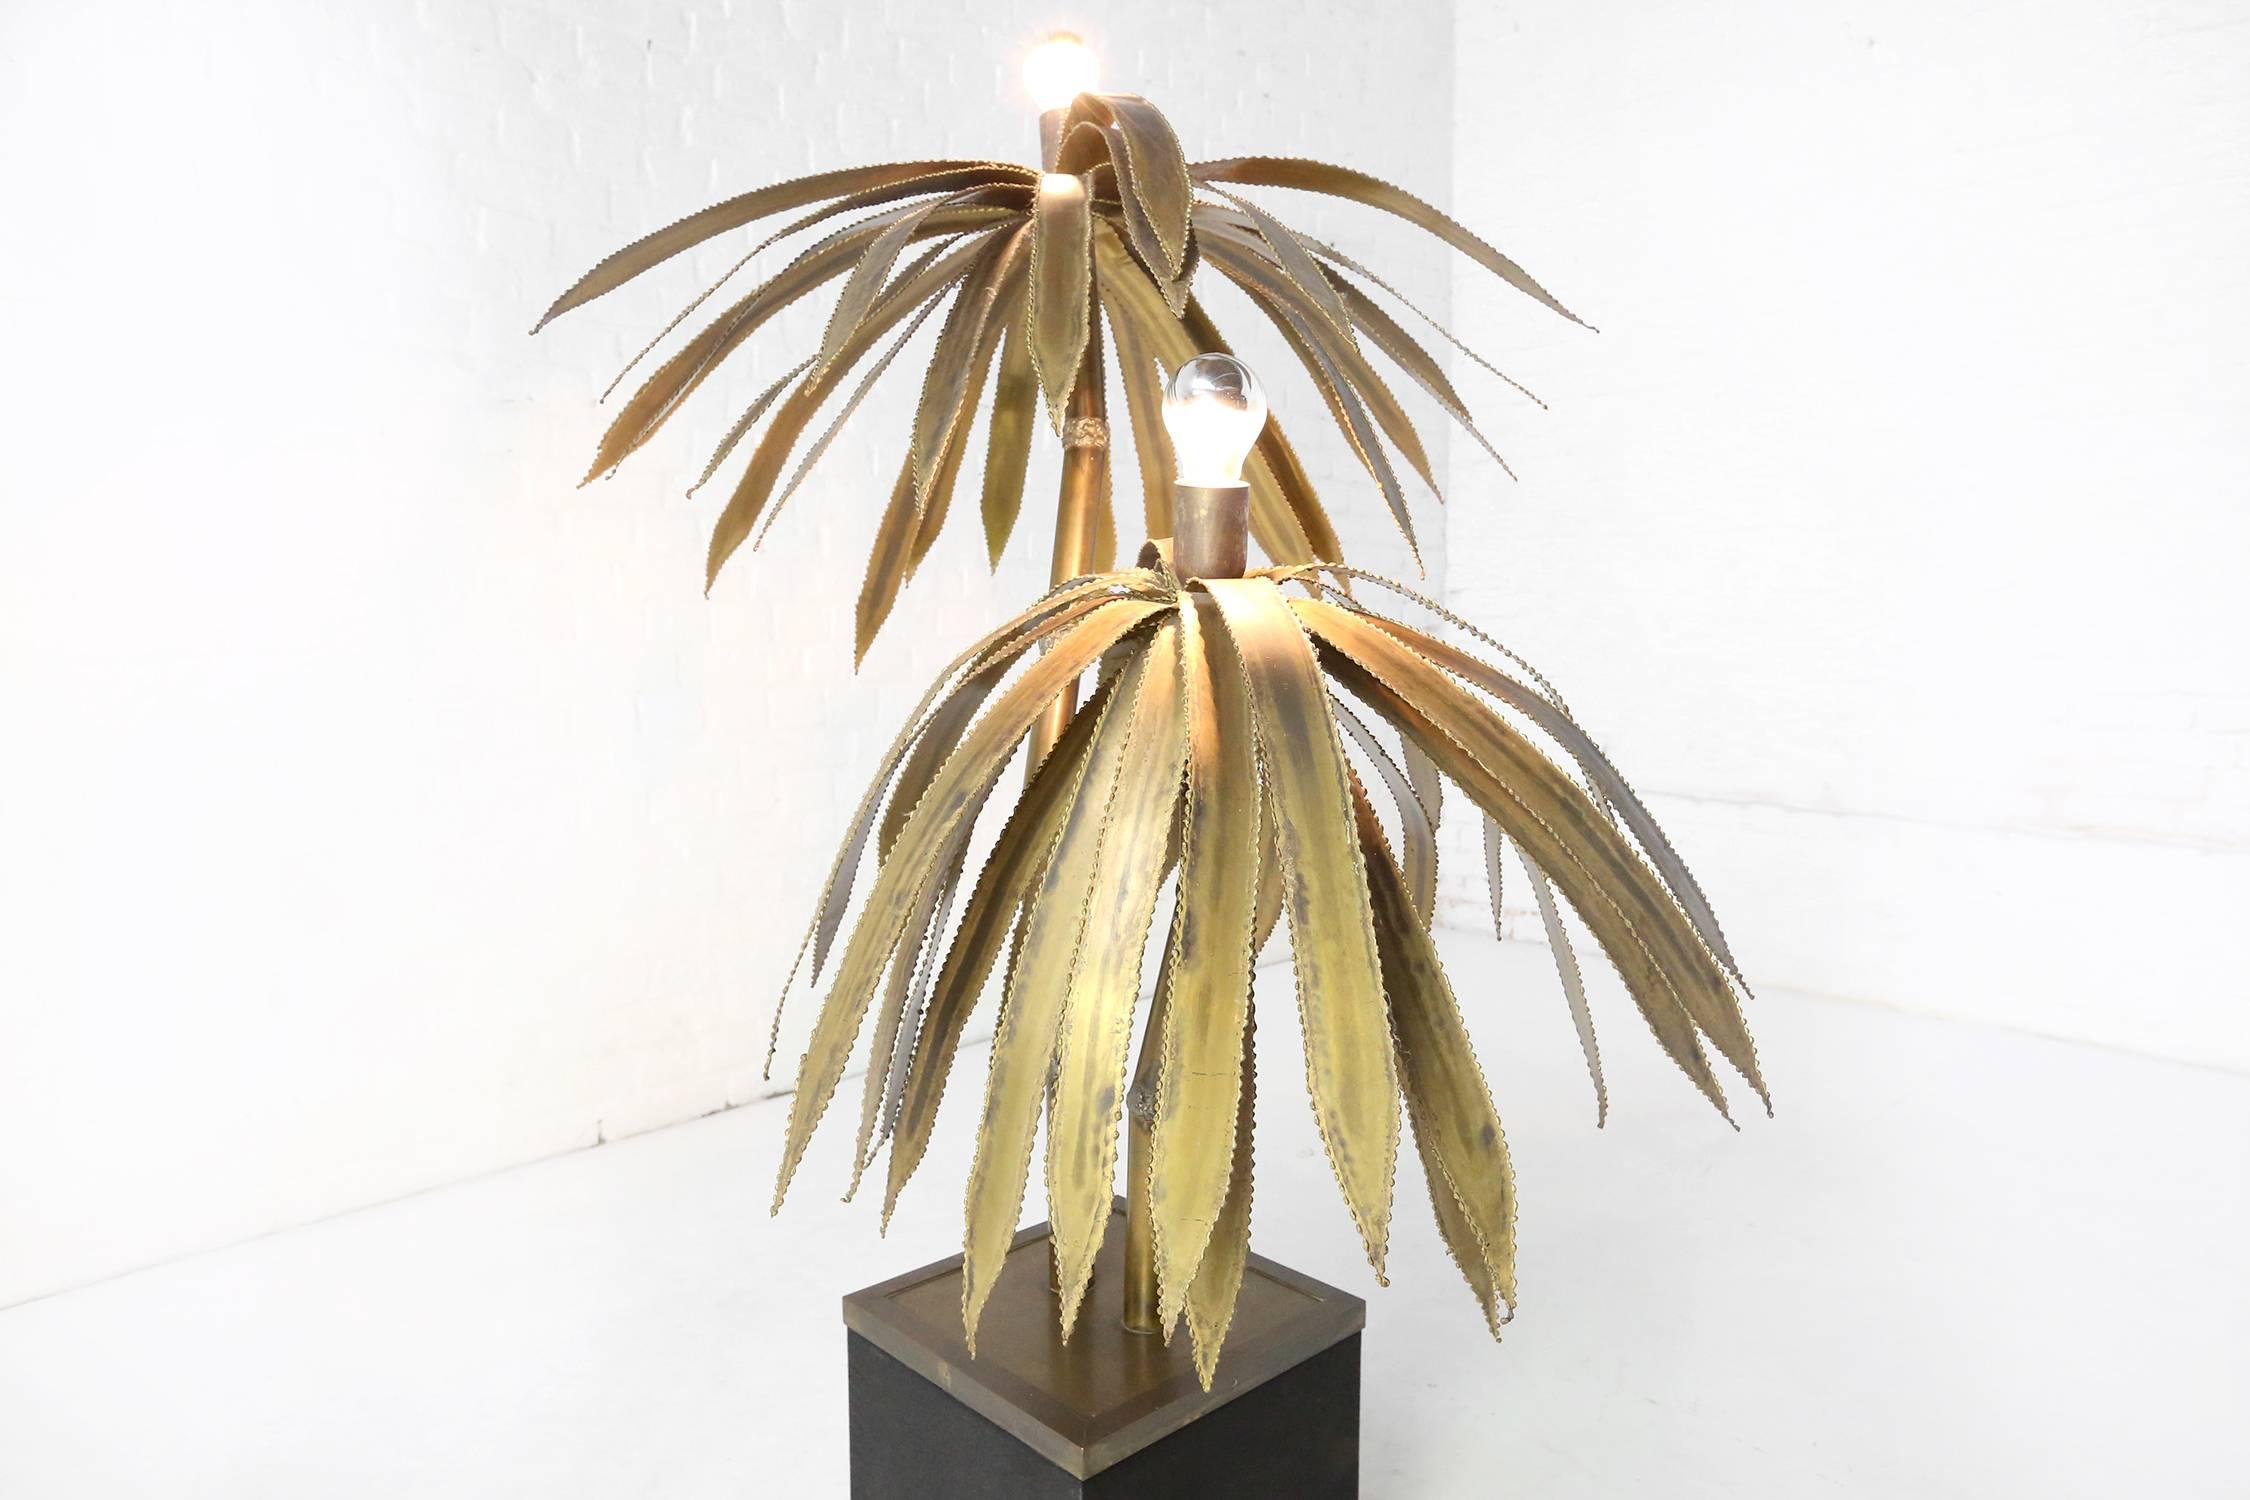 Brass Maison Jansen palm tree lamp, with two brass palm tree stems with a light on top of each.
Mounted on a felt covered base with bronze edging.
Rewired with black antique cord flex and switch.
Base measures 26cm x 26cm x 26cm.